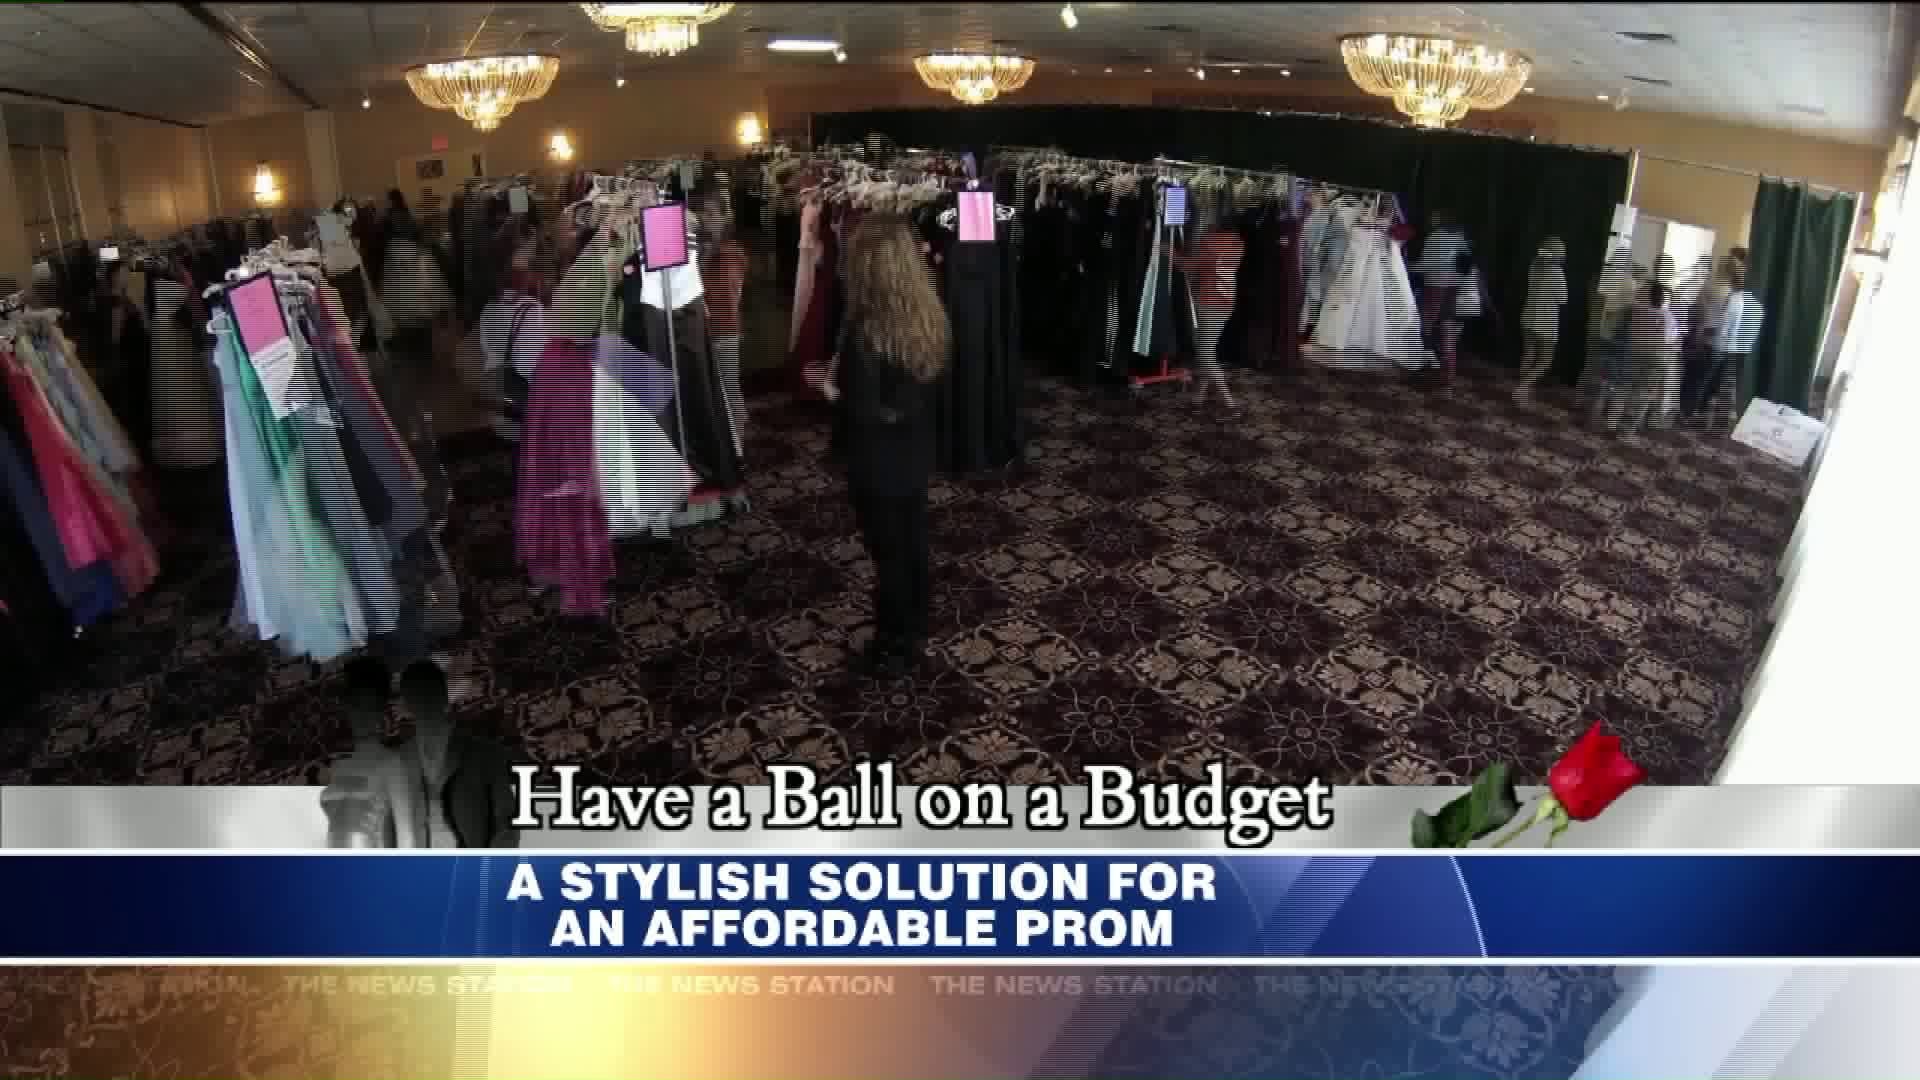 A Stylish Solution for an Affordable Prom